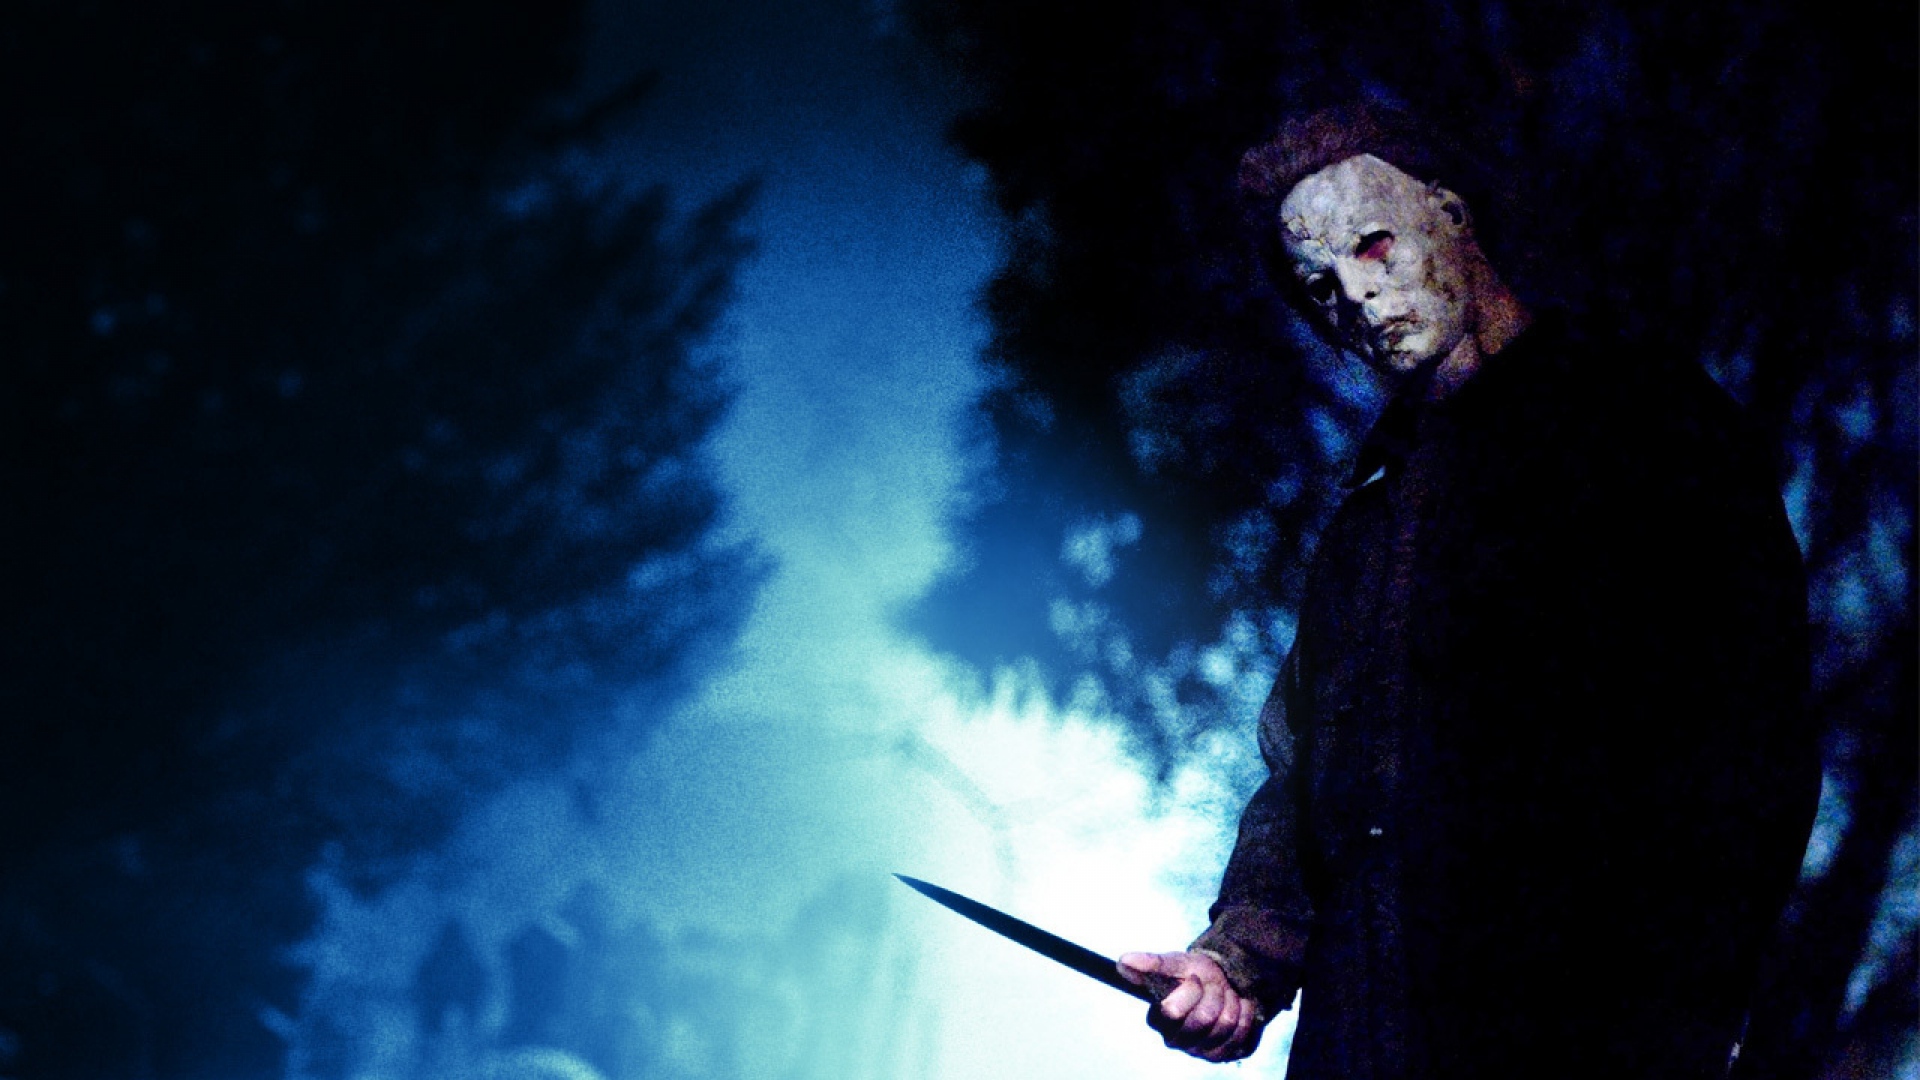  michael myers maniac killer from wallpapers4uorg your wallpaper